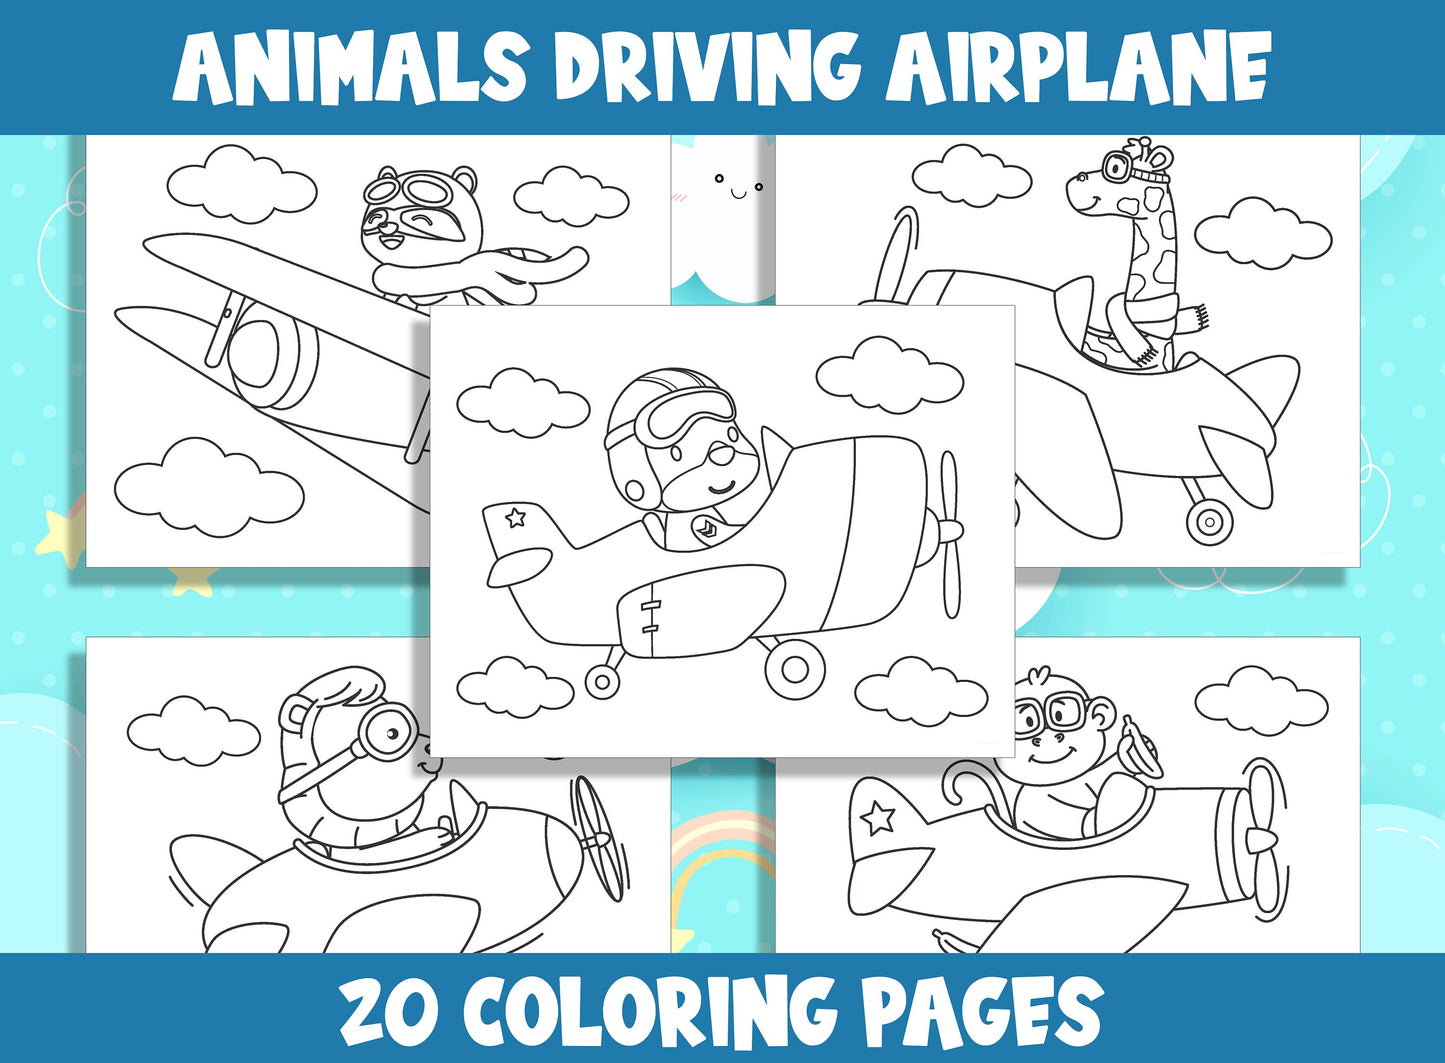 15 Cute Animals Driving Airplane Coloring Pages for Preschool and Kindergarten, PDF File, Instant Download